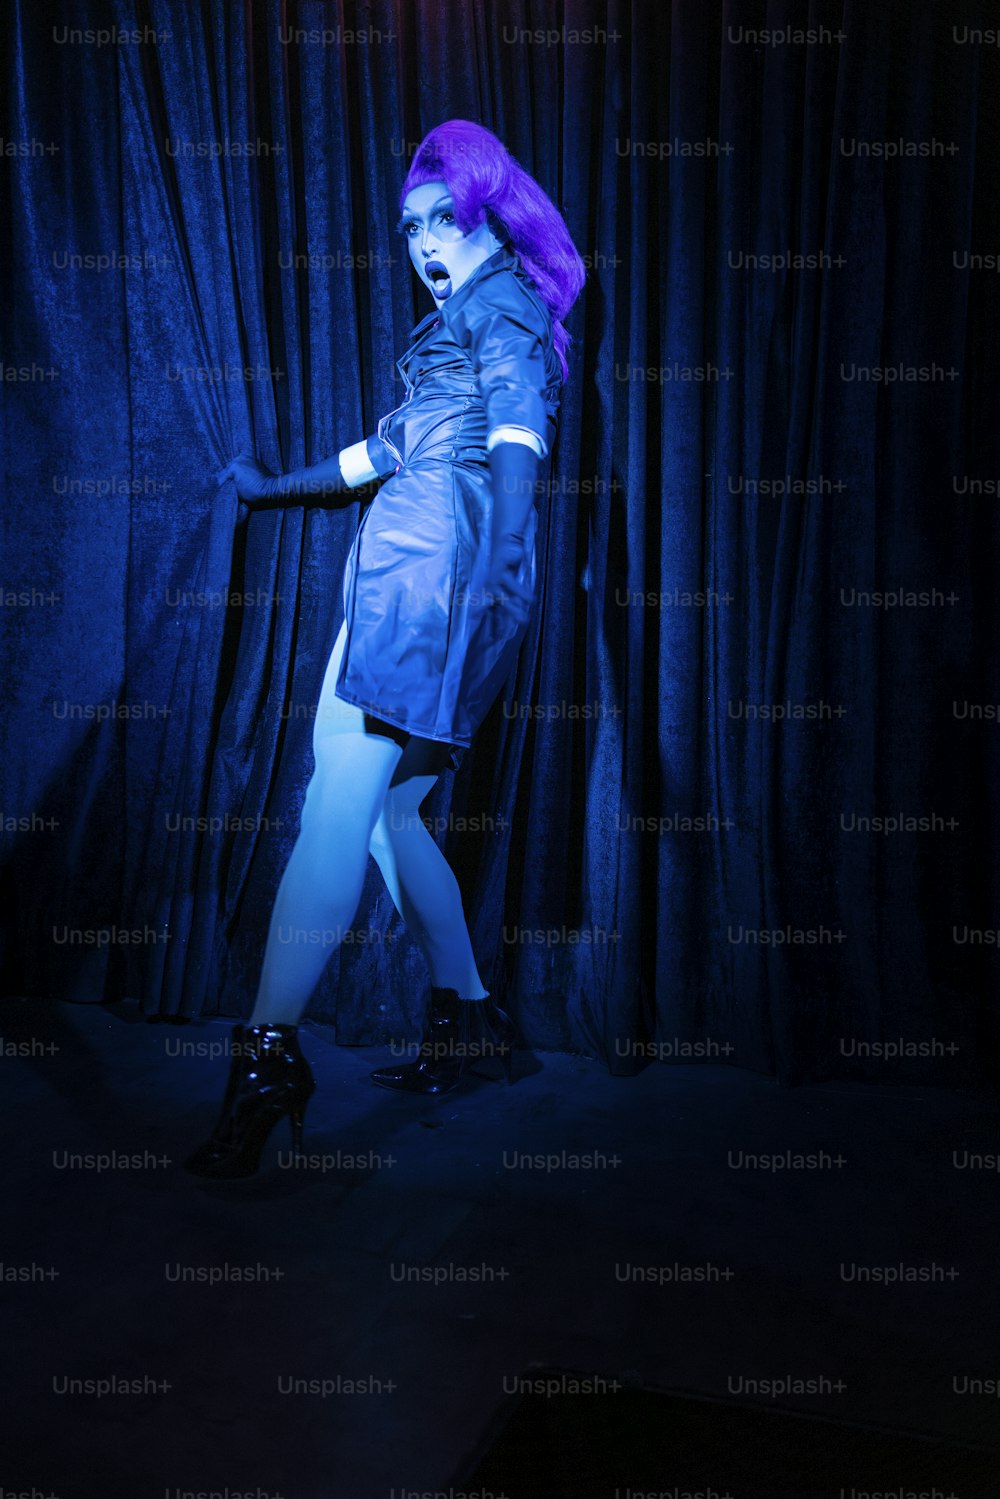 a woman with purple hair is standing in front of a curtain